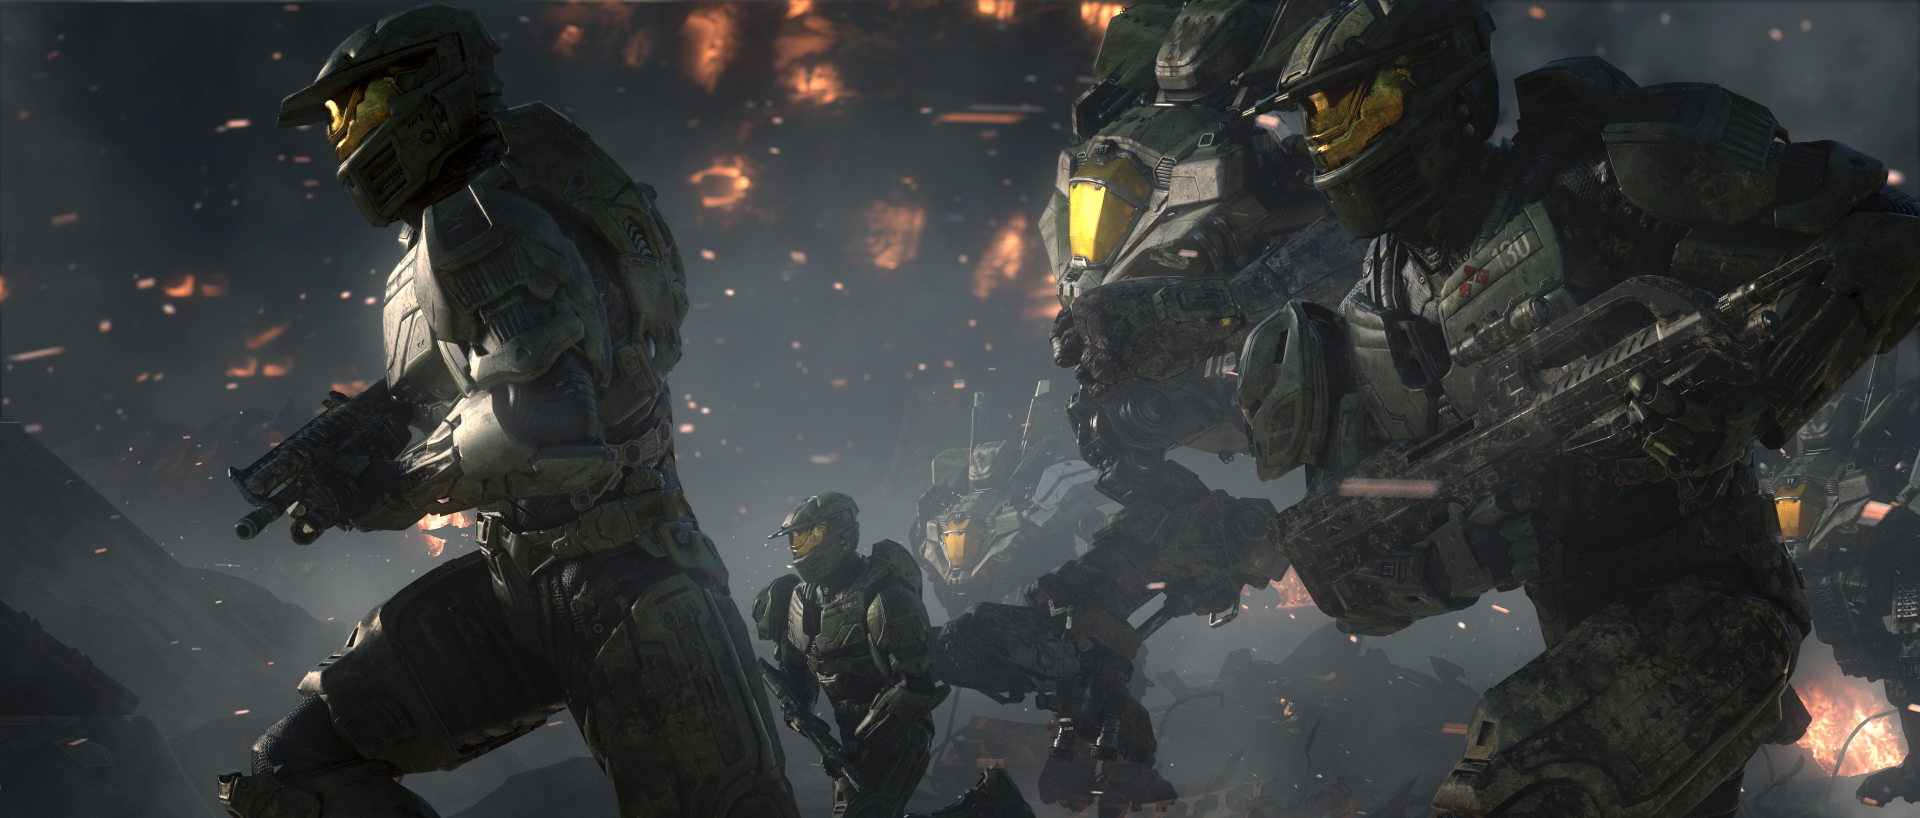 Halo Wars 2 HD Wallpaper and Background Image